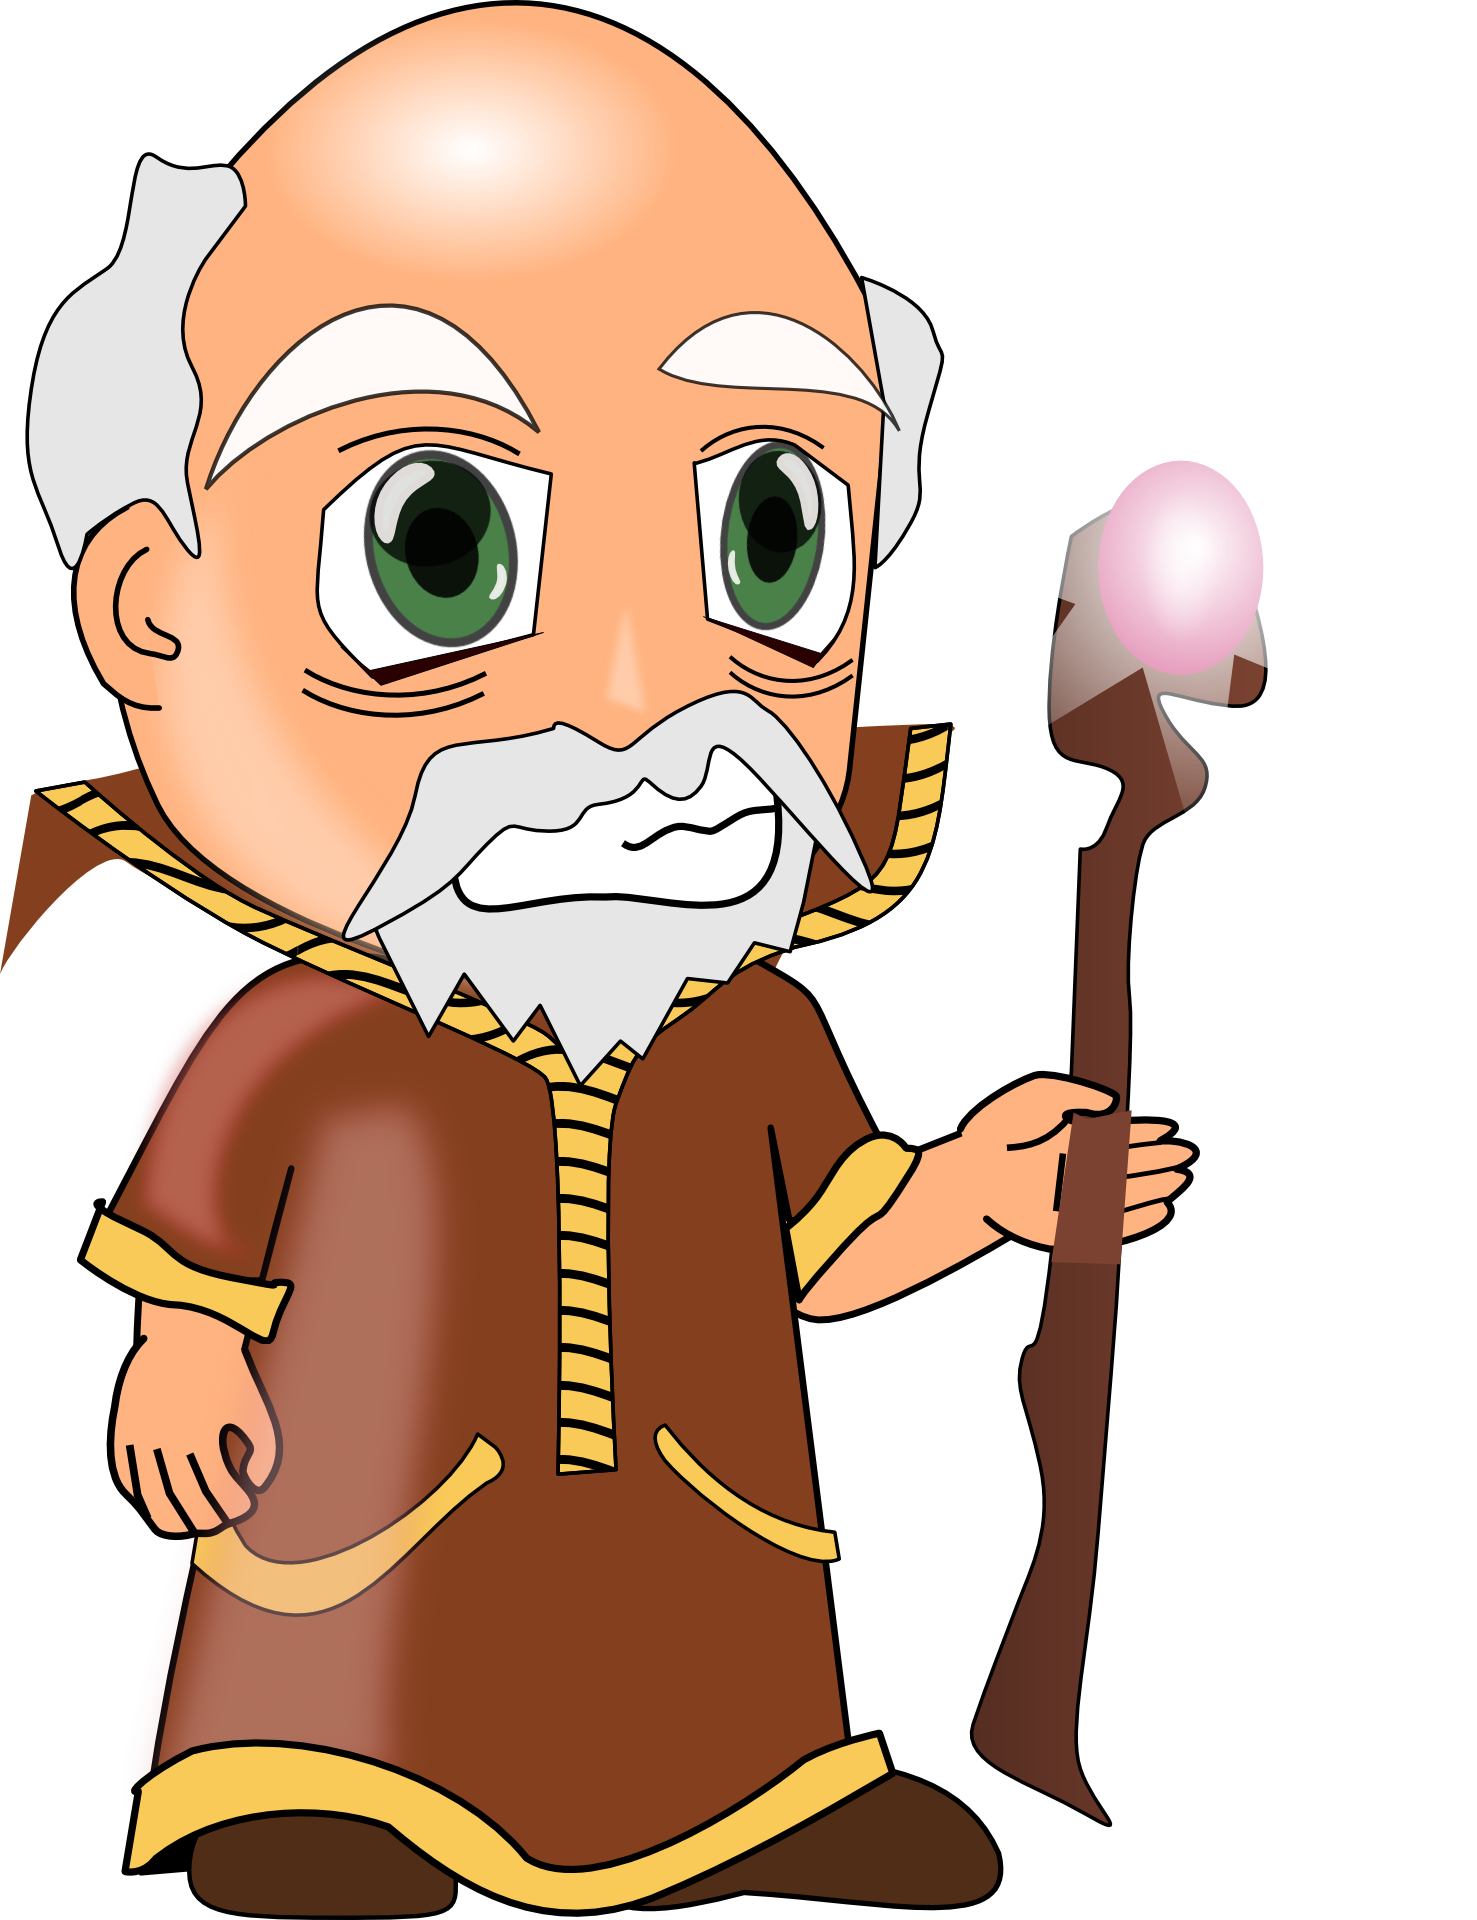 Magic Man Old People Wand Wise Categories Vector Man Vector People